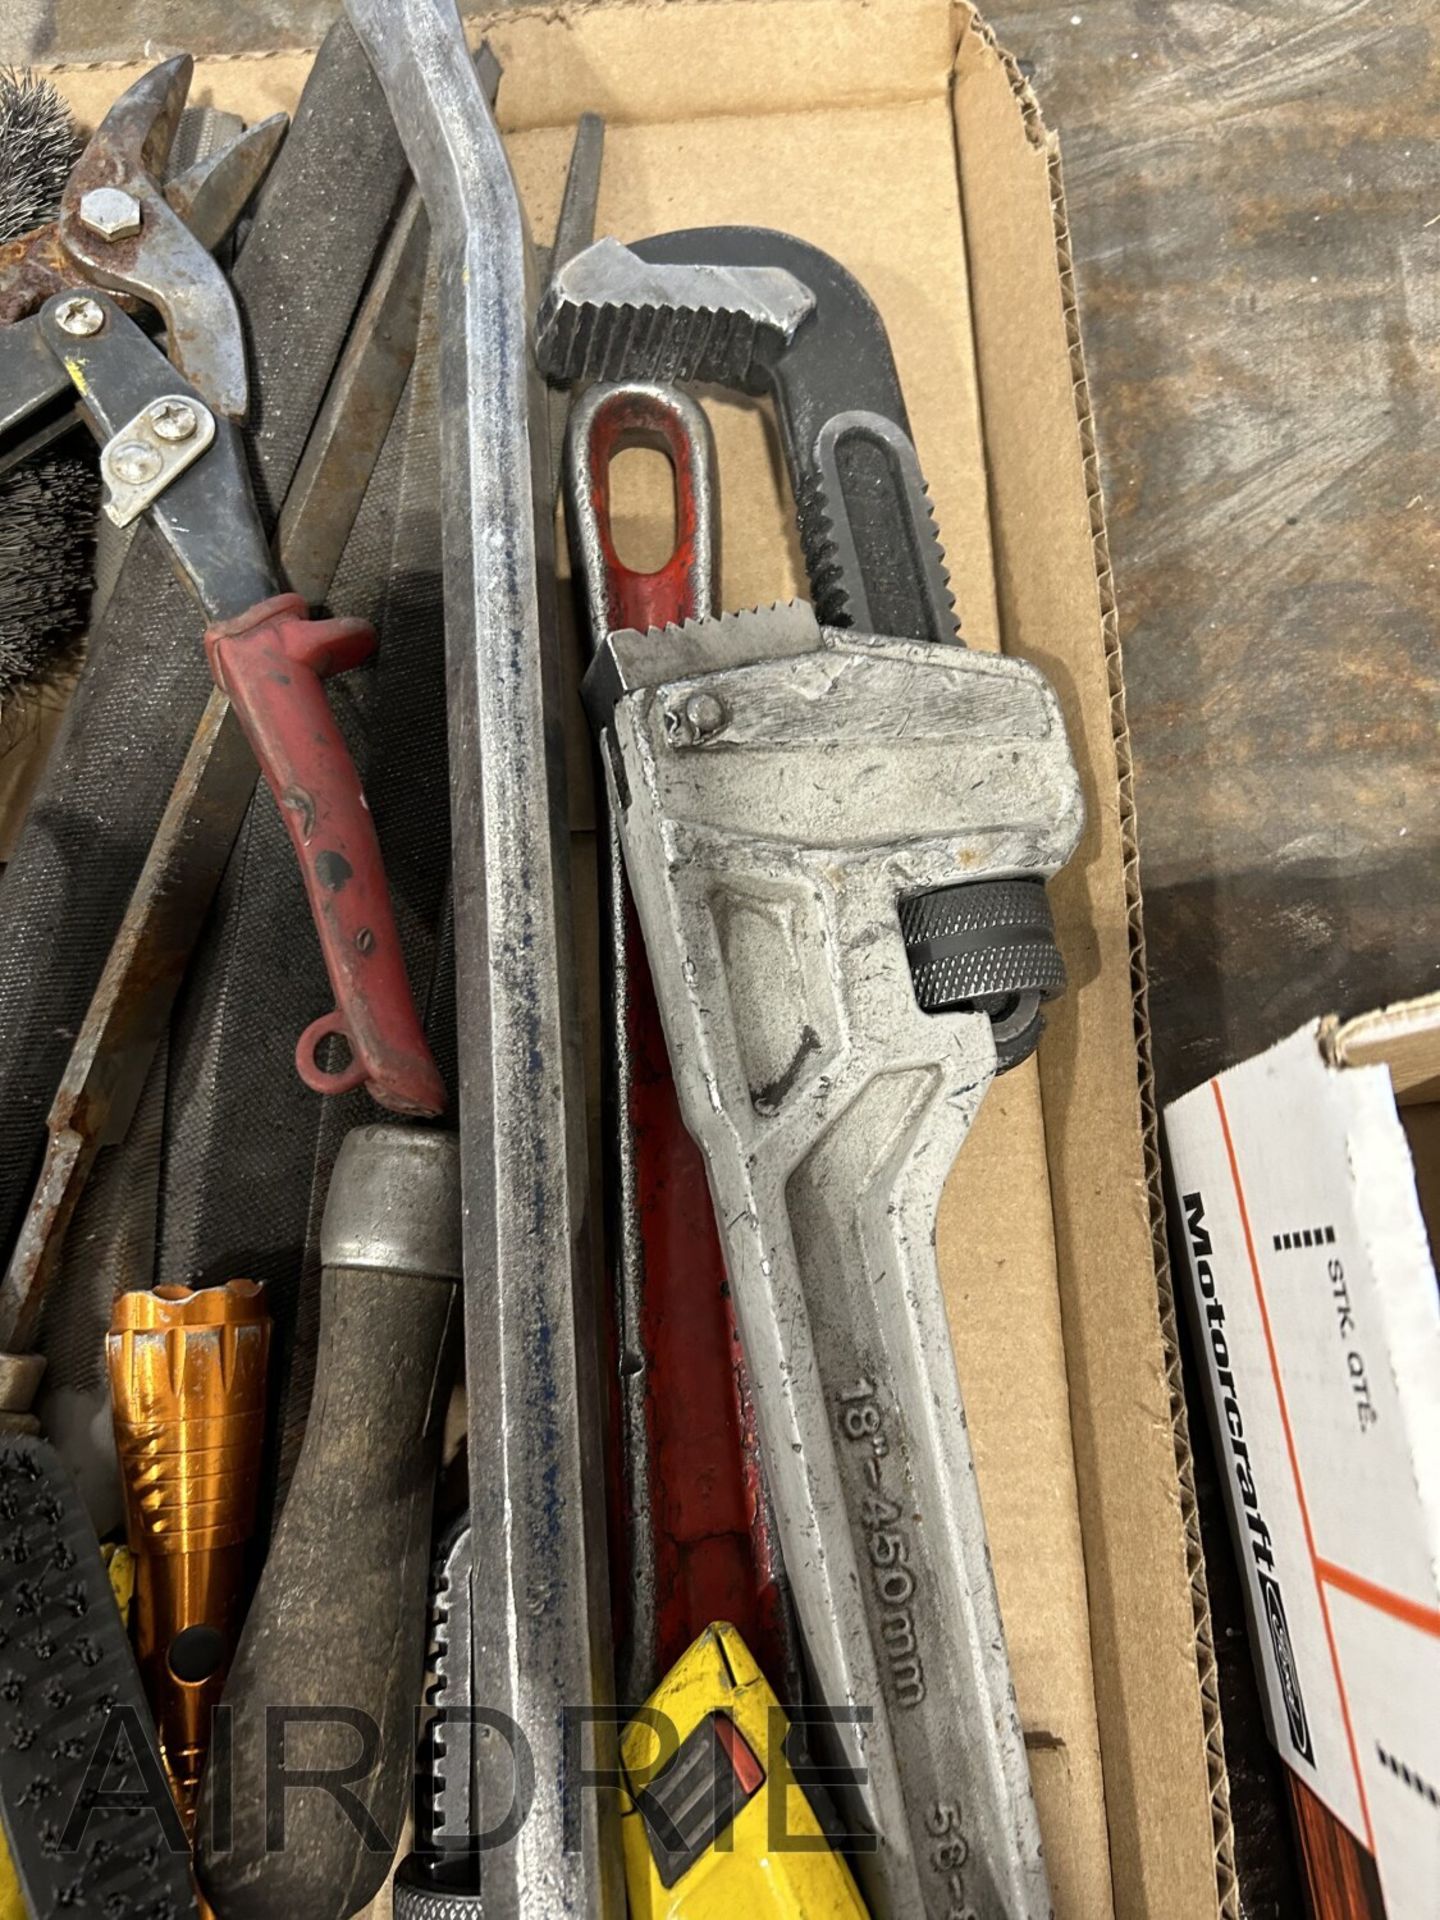 *OFFSITE* L/O ASSORTED HAND TOOLS, ALUMINUM 18" PIPE WRENCH, STEEL 18" PIPE WRENCH, PRY-BAR, ETC. - Image 3 of 3